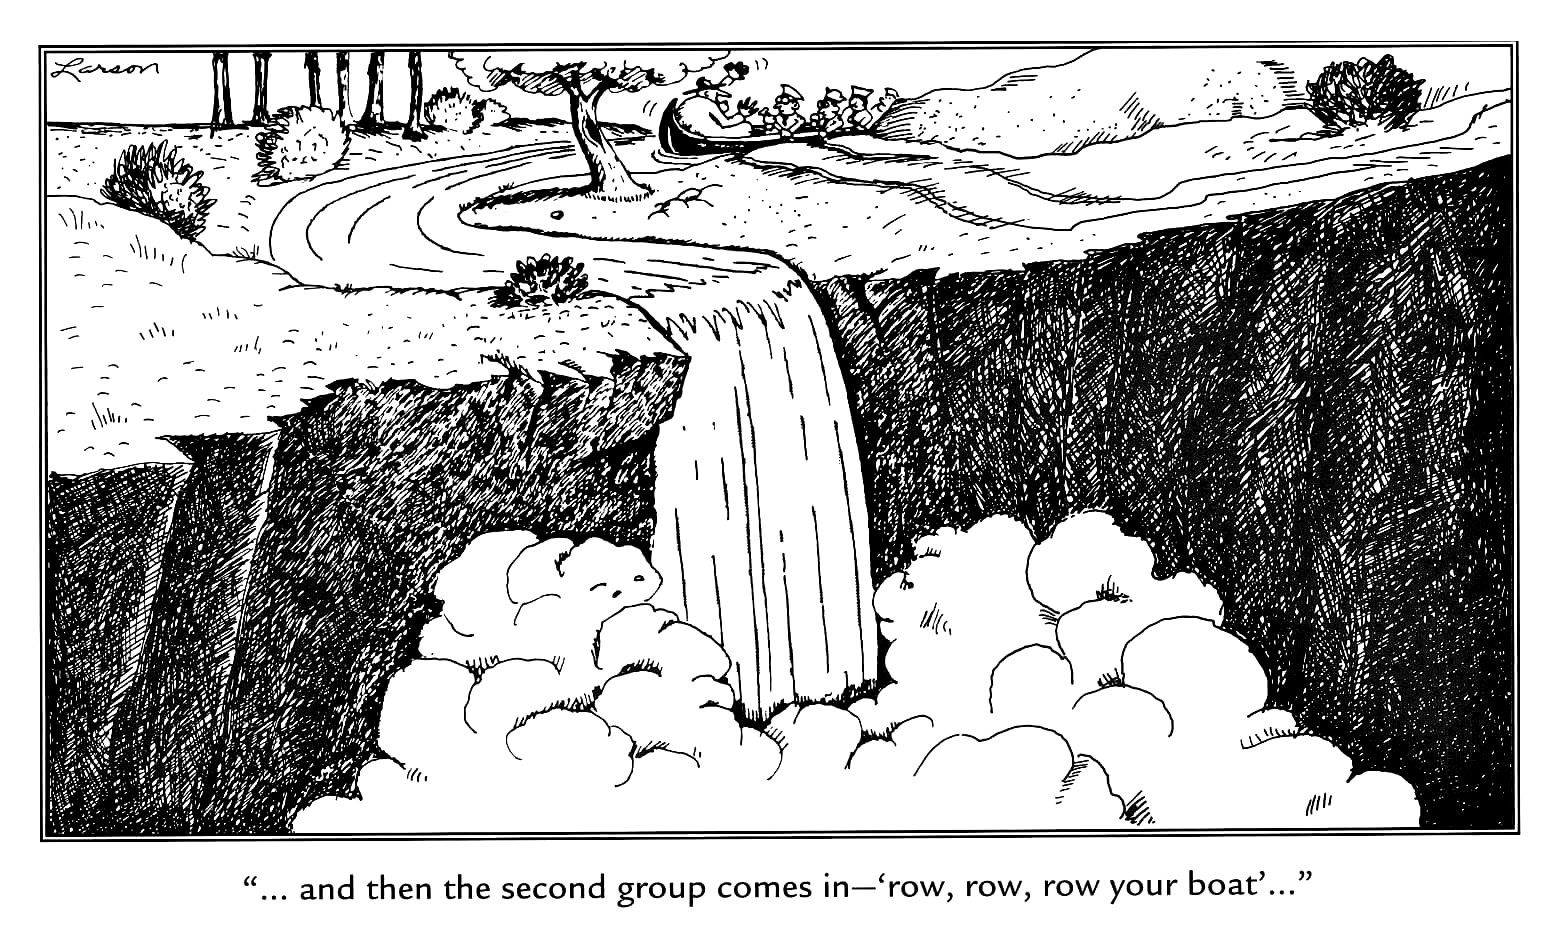 far side comic about the son row row row your boat